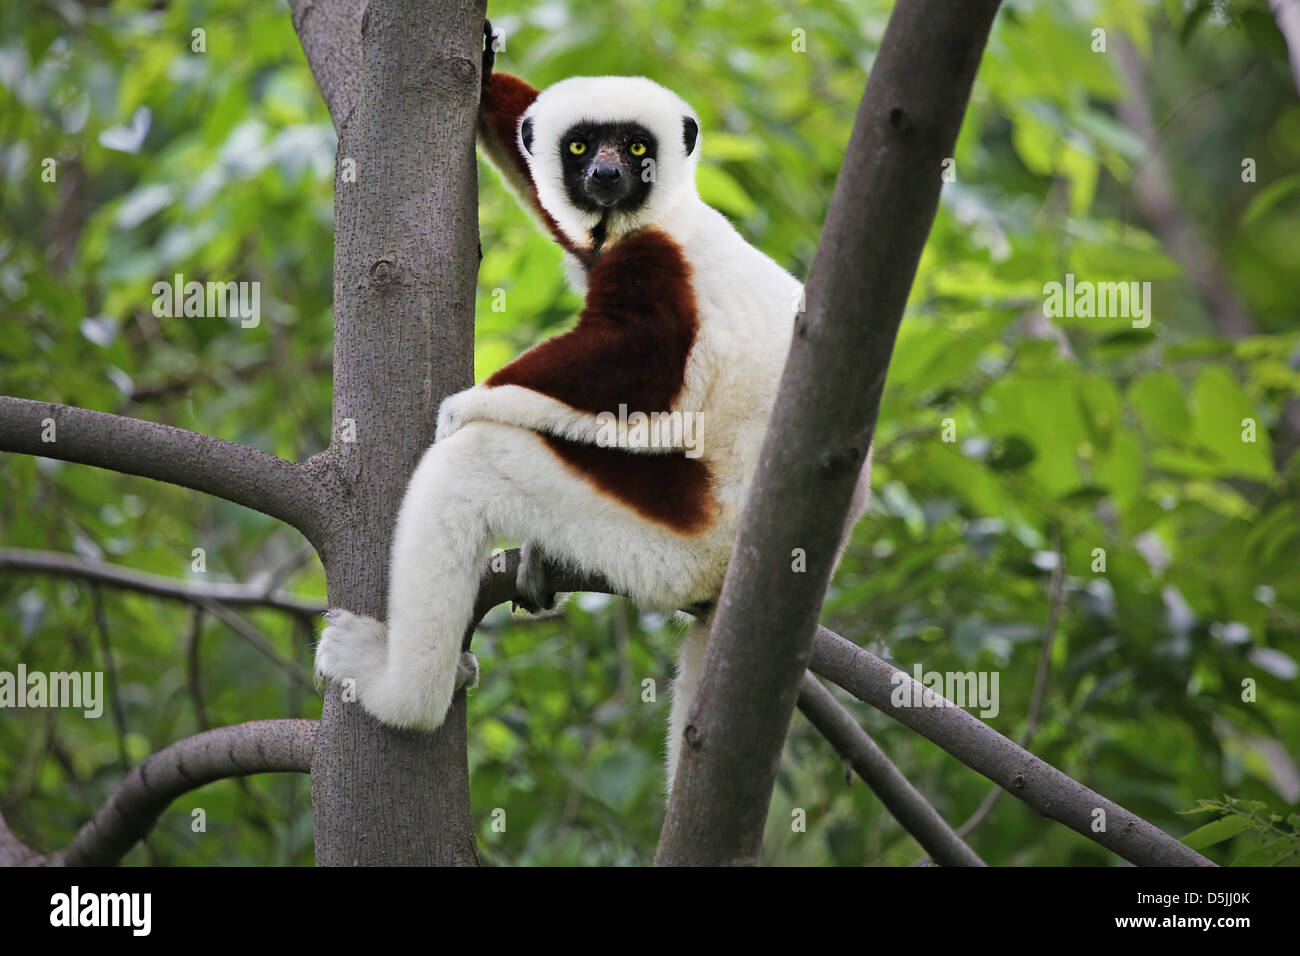 Endangered Coquerel's Sifaka (Propithecus coquereli) rests and looks in a tree in a rain forest in Madagascar (Ankarafantsika). Stock Photo